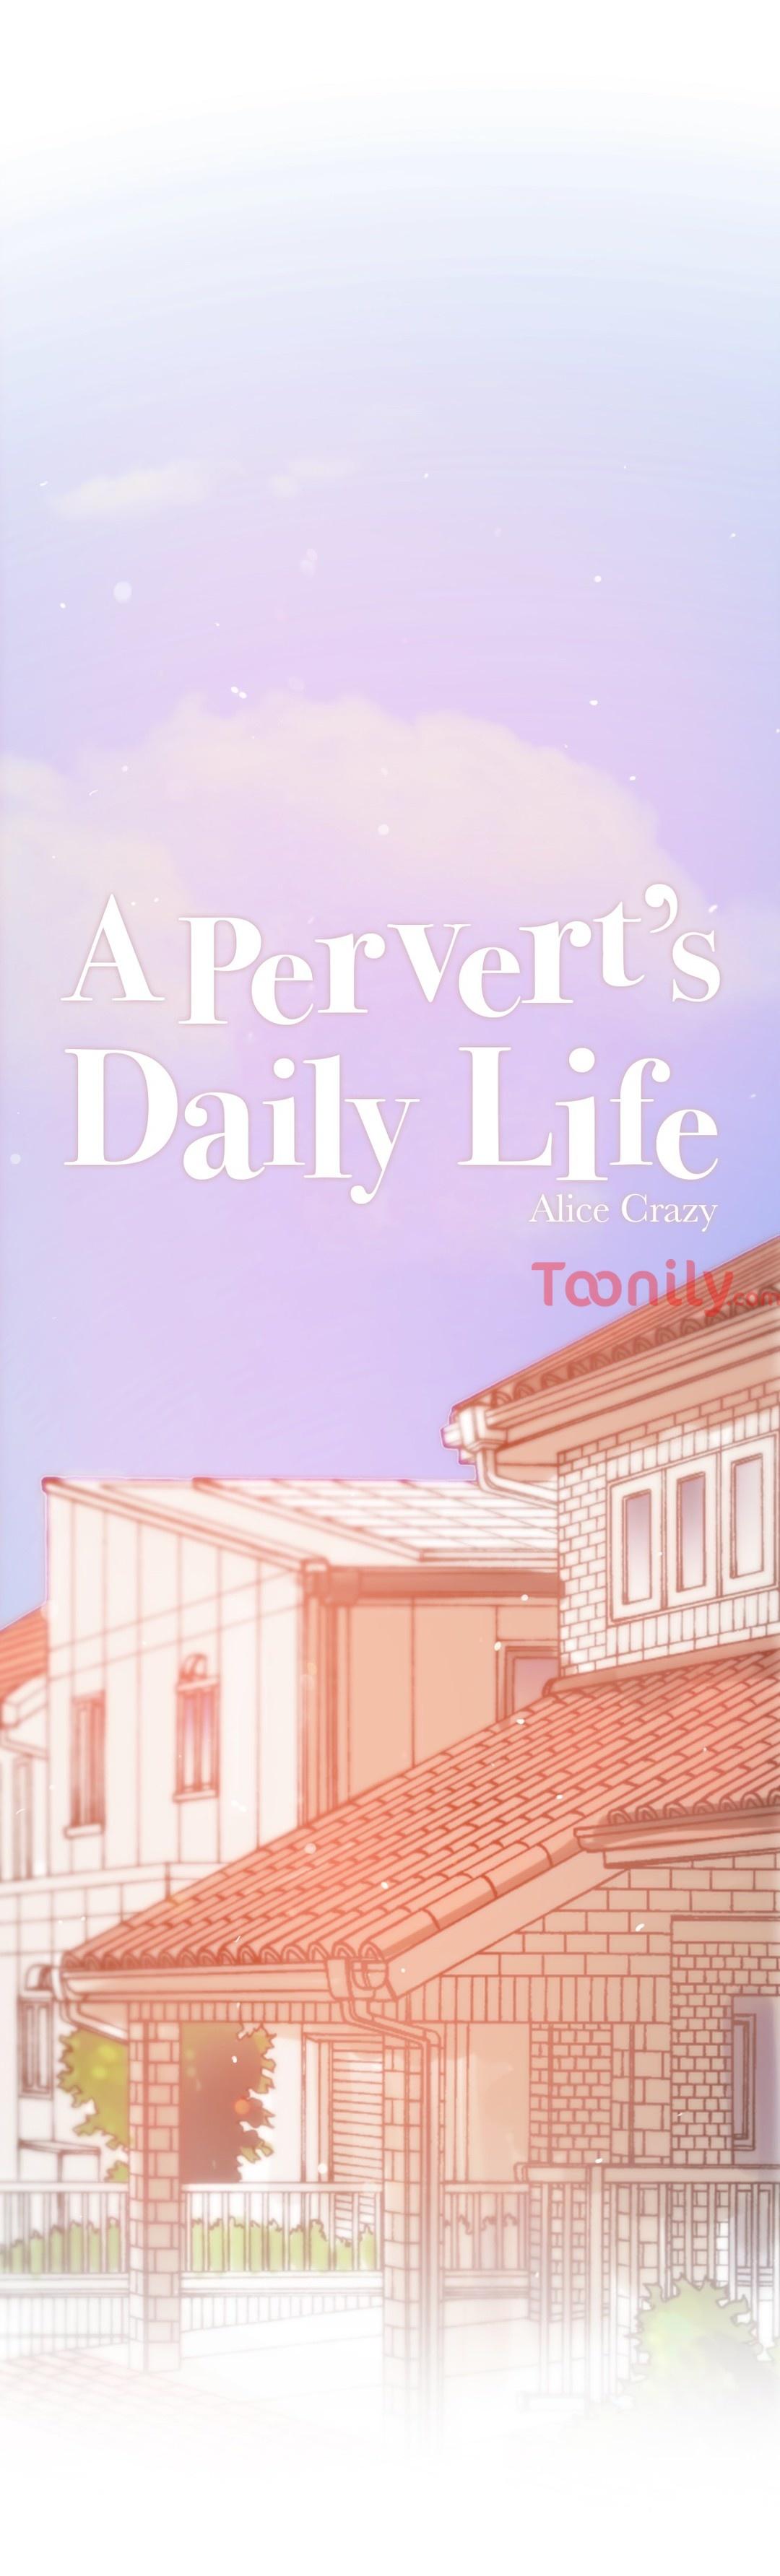 A Pervert's Daily Life • Chapter 61-65 94